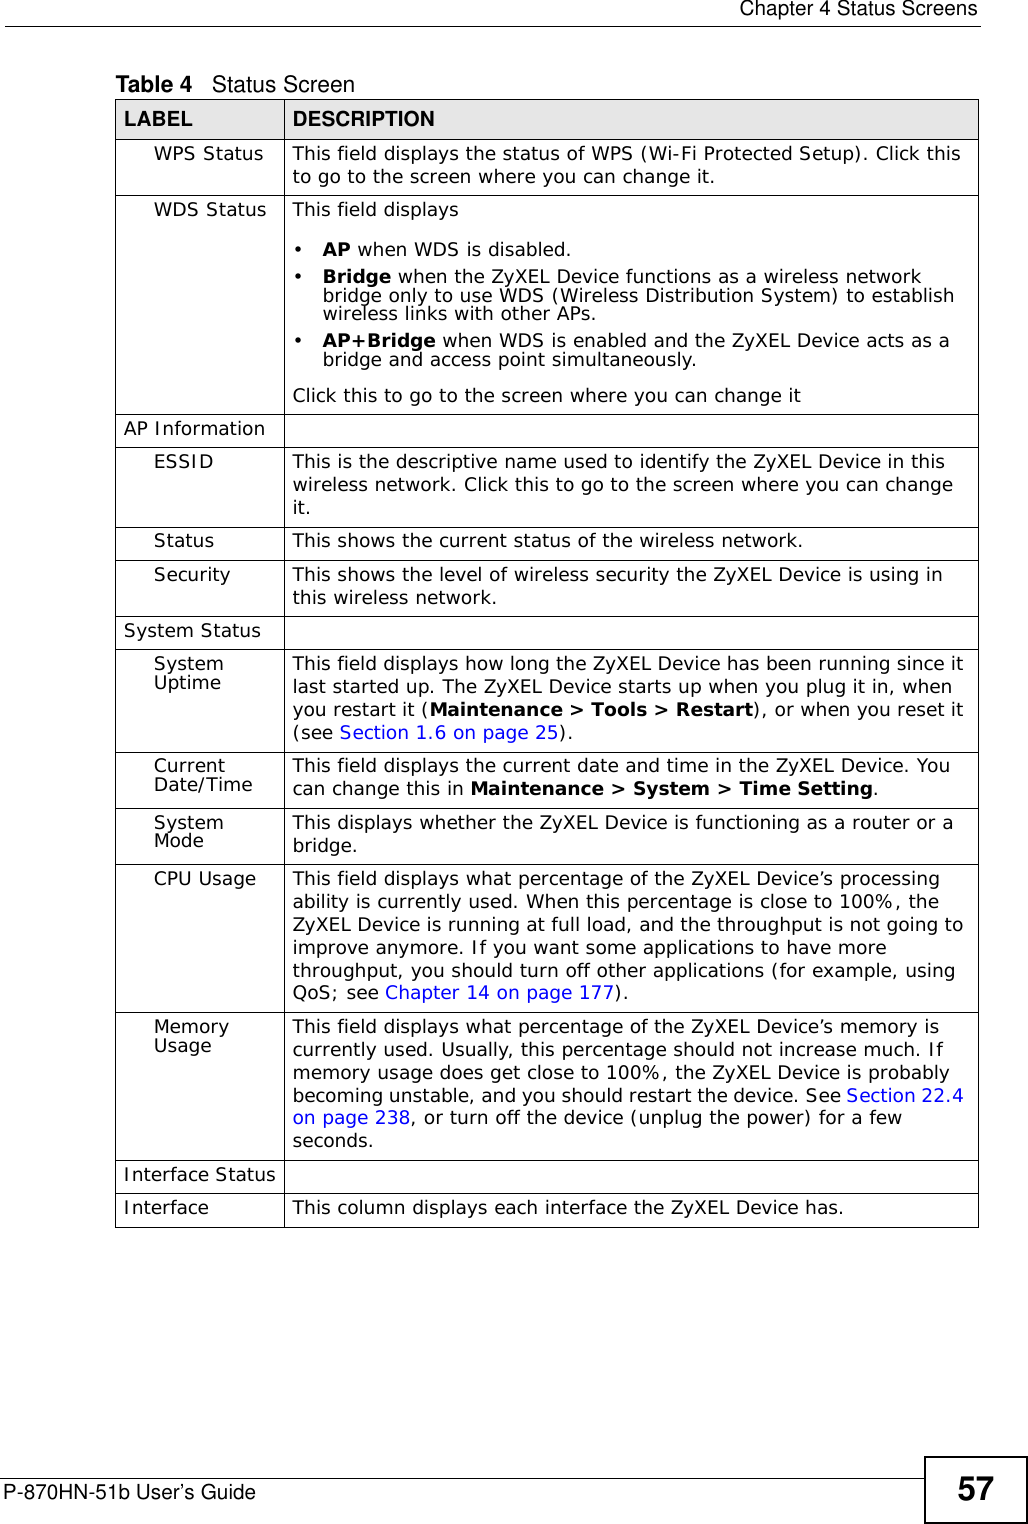  Chapter 4 Status ScreensP-870HN-51b User’s Guide 57WPS Status This field displays the status of WPS (Wi-Fi Protected Setup). Click this to go to the screen where you can change it.WDS Status This field displays •AP when WDS is disabled.•Bridge when the ZyXEL Device functions as a wireless network bridge only to use WDS (Wireless Distribution System) to establish wireless links with other APs. •AP+Bridge when WDS is enabled and the ZyXEL Device acts as a bridge and access point simultaneously. Click this to go to the screen where you can change itAP InformationESSID This is the descriptive name used to identify the ZyXEL Device in this wireless network. Click this to go to the screen where you can change it.Status This shows the current status of the wireless network.Security This shows the level of wireless security the ZyXEL Device is using in this wireless network.System StatusSystem Uptime This field displays how long the ZyXEL Device has been running since it last started up. The ZyXEL Device starts up when you plug it in, when you restart it (Maintenance &gt; Tools &gt; Restart), or when you reset it (see Section 1.6 on page 25).Current Date/Time This field displays the current date and time in the ZyXEL Device. You can change this in Maintenance &gt; System &gt; Time Setting.System Mode This displays whether the ZyXEL Device is functioning as a router or a bridge.CPU Usage This field displays what percentage of the ZyXEL Device’s processing ability is currently used. When this percentage is close to 100%, the ZyXEL Device is running at full load, and the throughput is not going to improve anymore. If you want some applications to have more throughput, you should turn off other applications (for example, using QoS; see Chapter 14 on page 177).Memory Usage This field displays what percentage of the ZyXEL Device’s memory is currently used. Usually, this percentage should not increase much. If memory usage does get close to 100%, the ZyXEL Device is probably becoming unstable, and you should restart the device. See Section 22.4 on page 238, or turn off the device (unplug the power) for a few seconds.Interface StatusInterface This column displays each interface the ZyXEL Device has.Table 4   Status ScreenLABEL DESCRIPTION